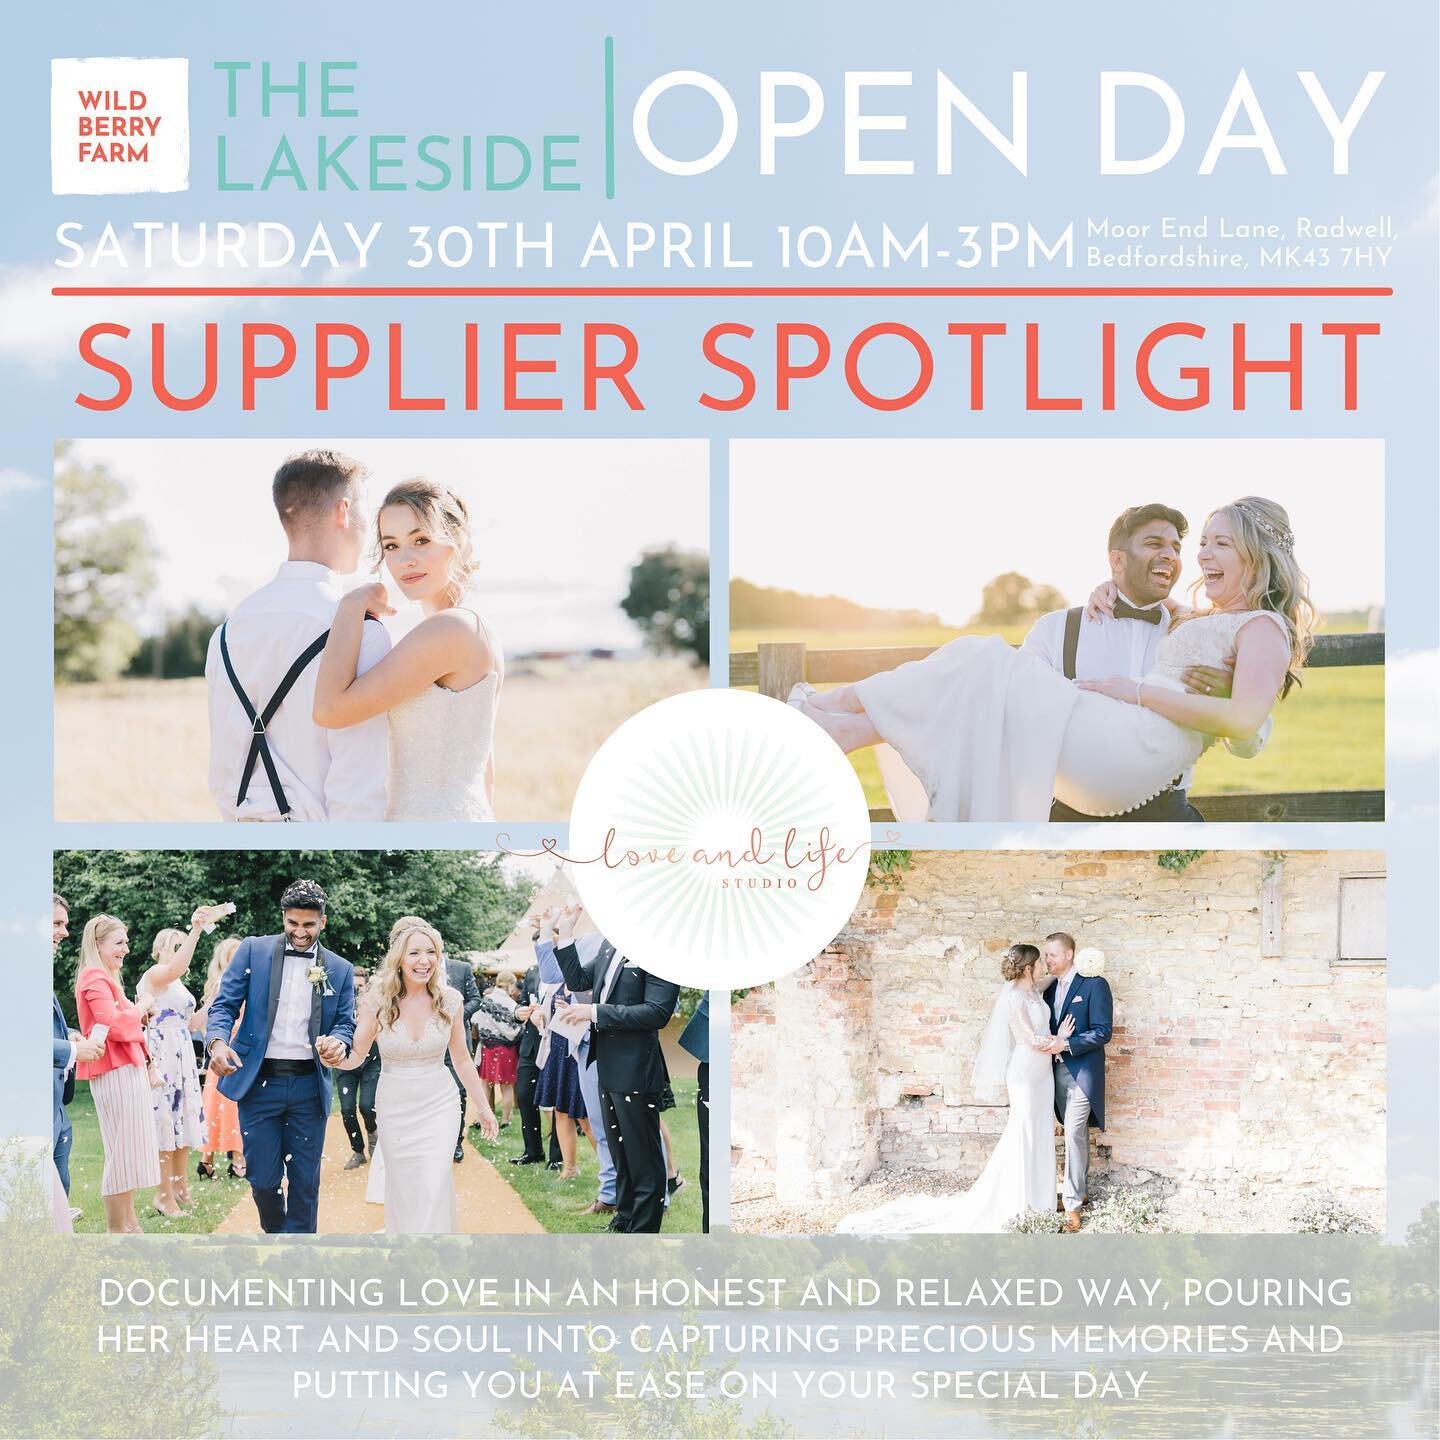 Supplier Spotlight | Capturing timeless imagery in an honest way, with a fresh fine art feel, we&rsquo;re delighted to have @loveandlifestudio supporting our open day - and an exciting photo shoot this weekend too!

Documenting a wedding is such an h